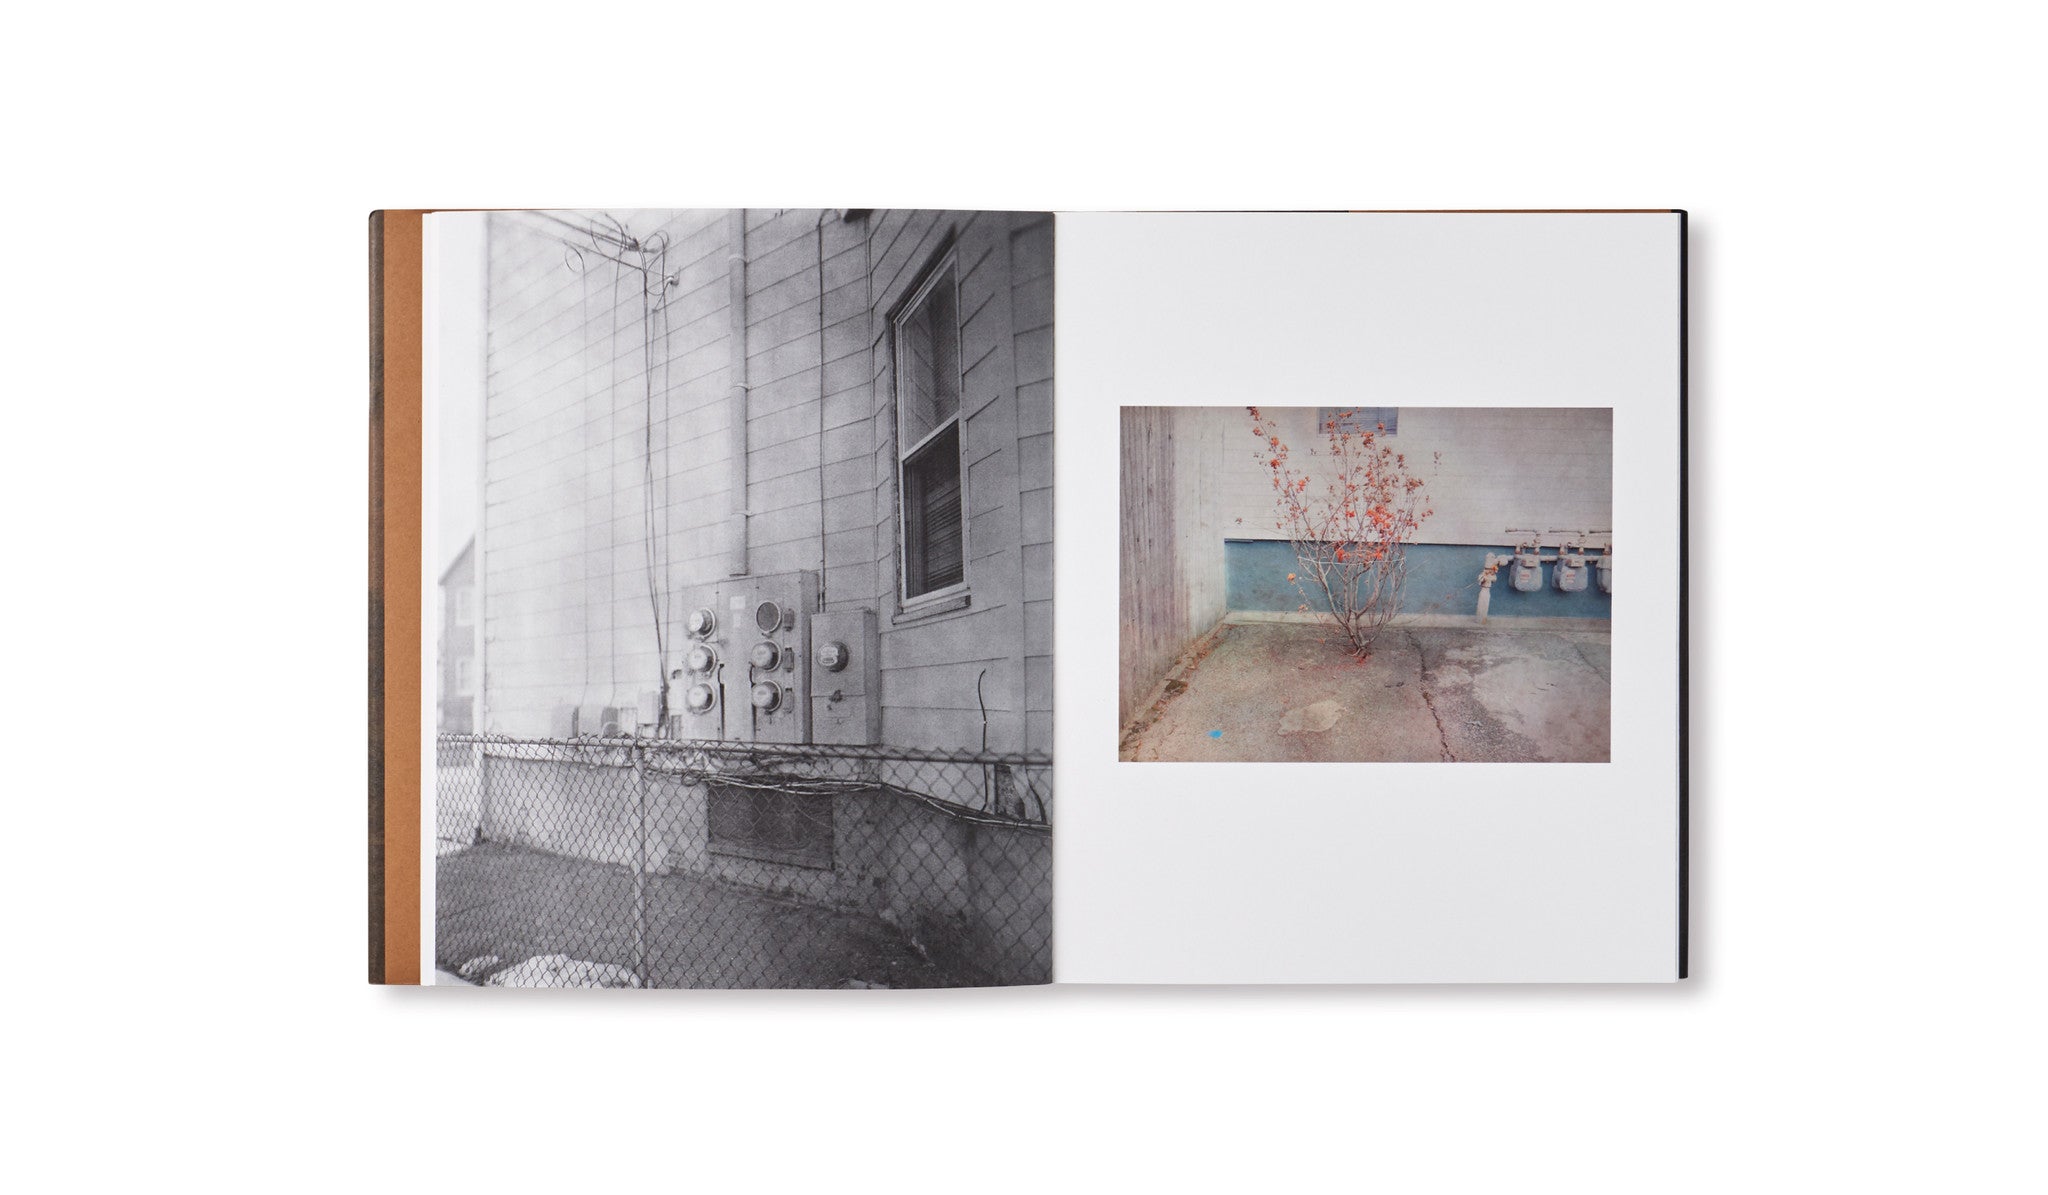 SUBSCRIPTION SERIES #4 by Christian Patterson, Alessandra Sanguinetti, Raymond Meeks and Wolfgang Tillmans